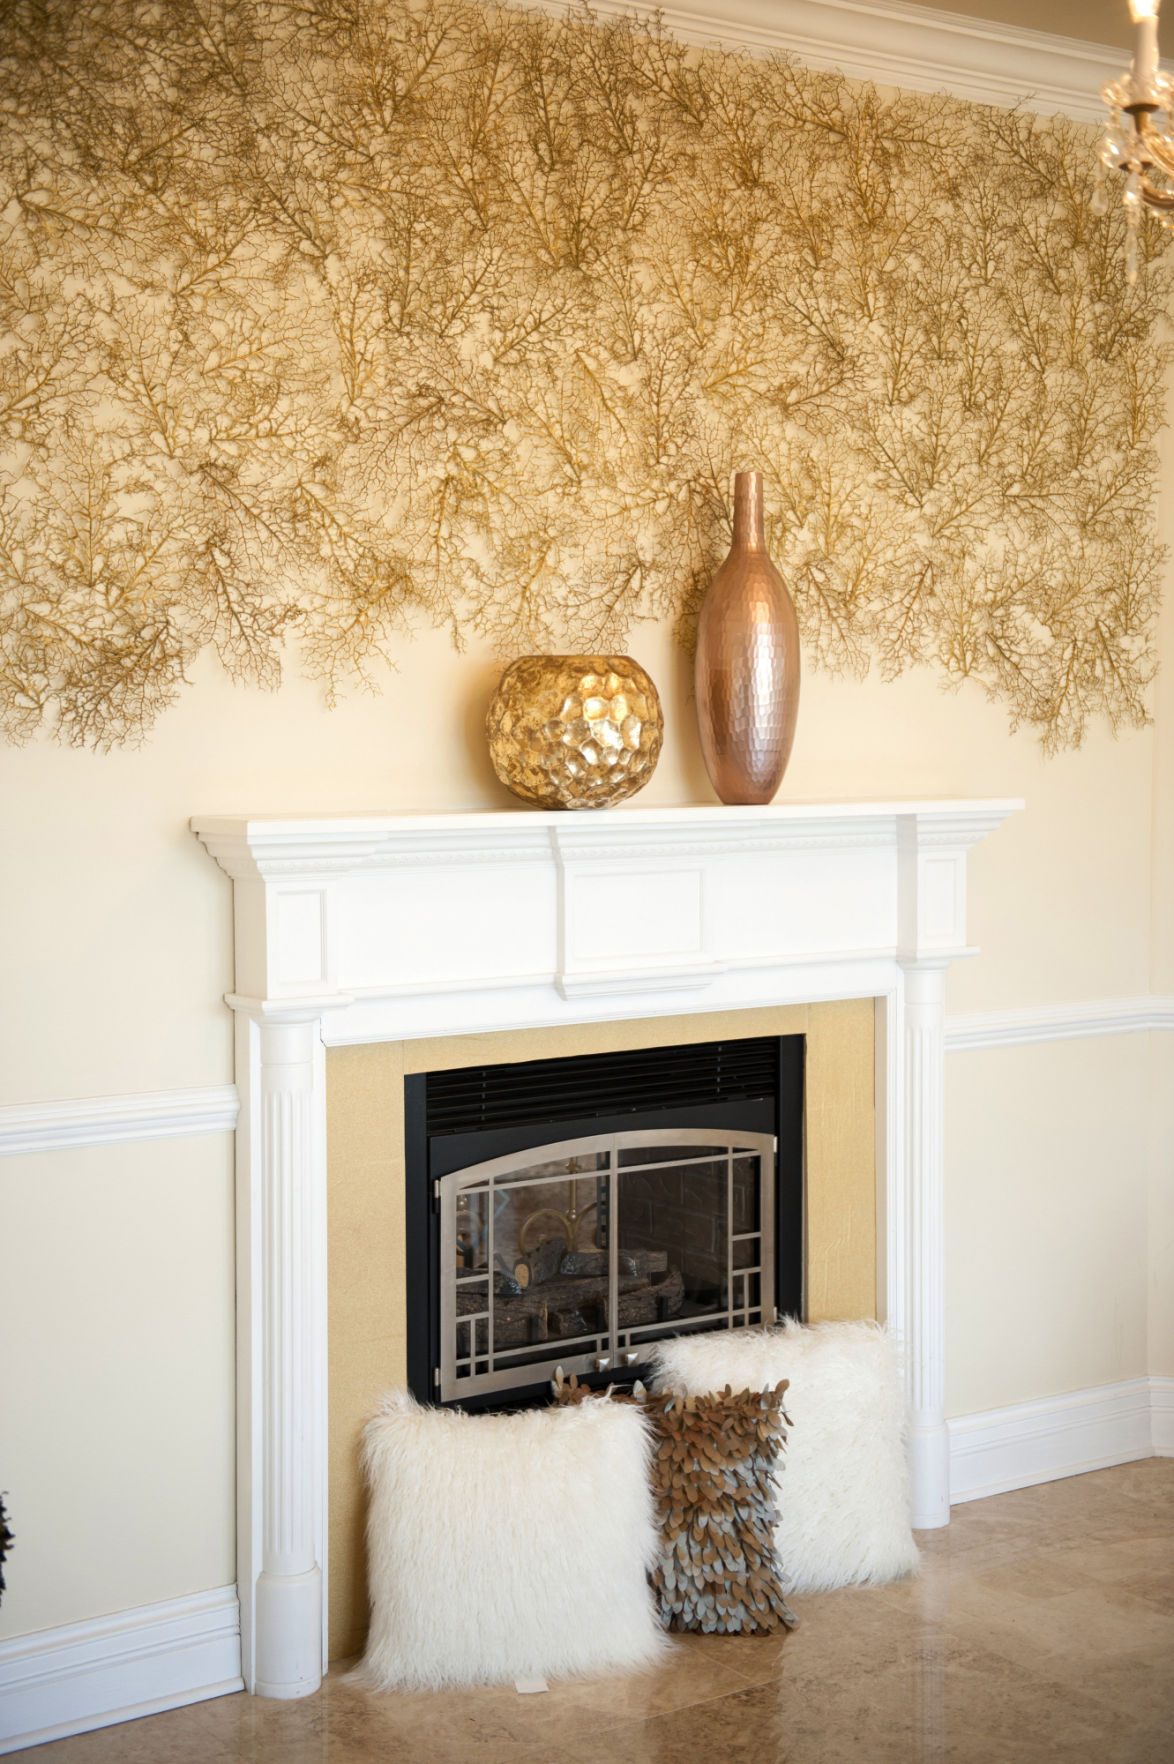 Fireplace Crown Molding Lovely Artistic Updates Lend Middle Eastern Glam to This Munster